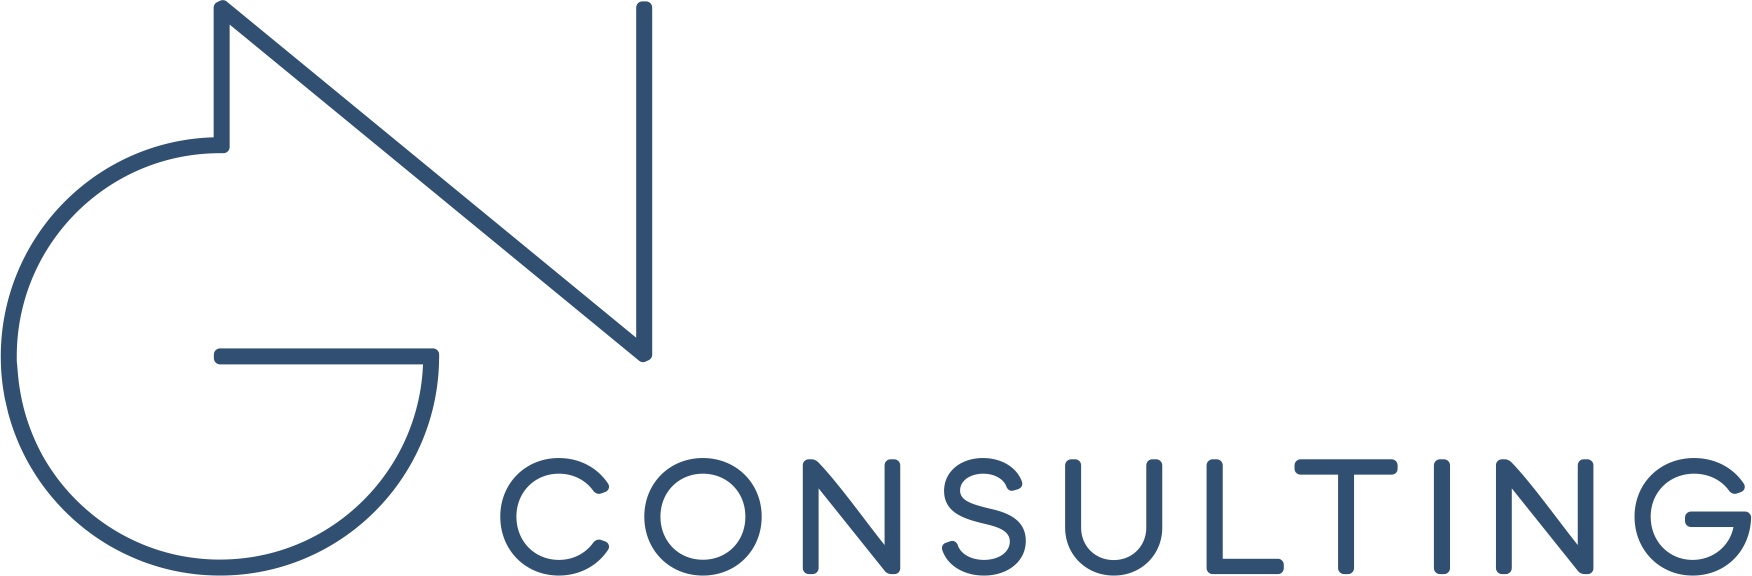 Блоги - GN Consulting